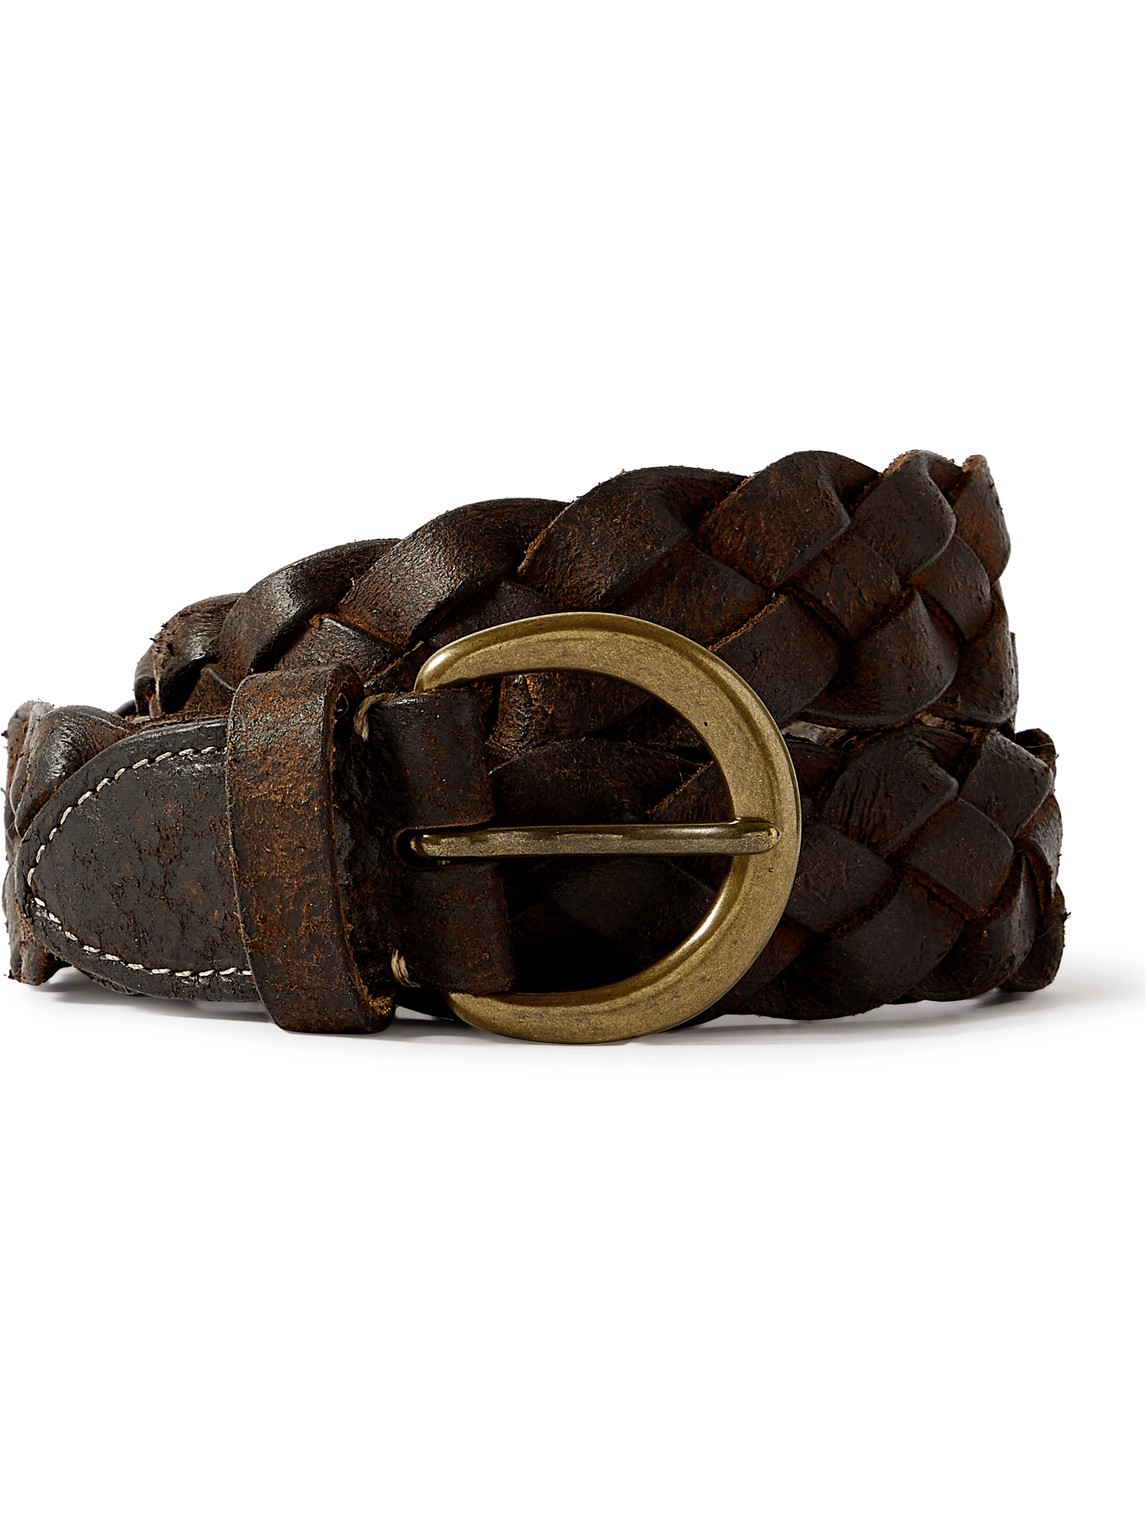 Rrl 3cm Distressed Woven Leather Belt In Brown | ModeSens